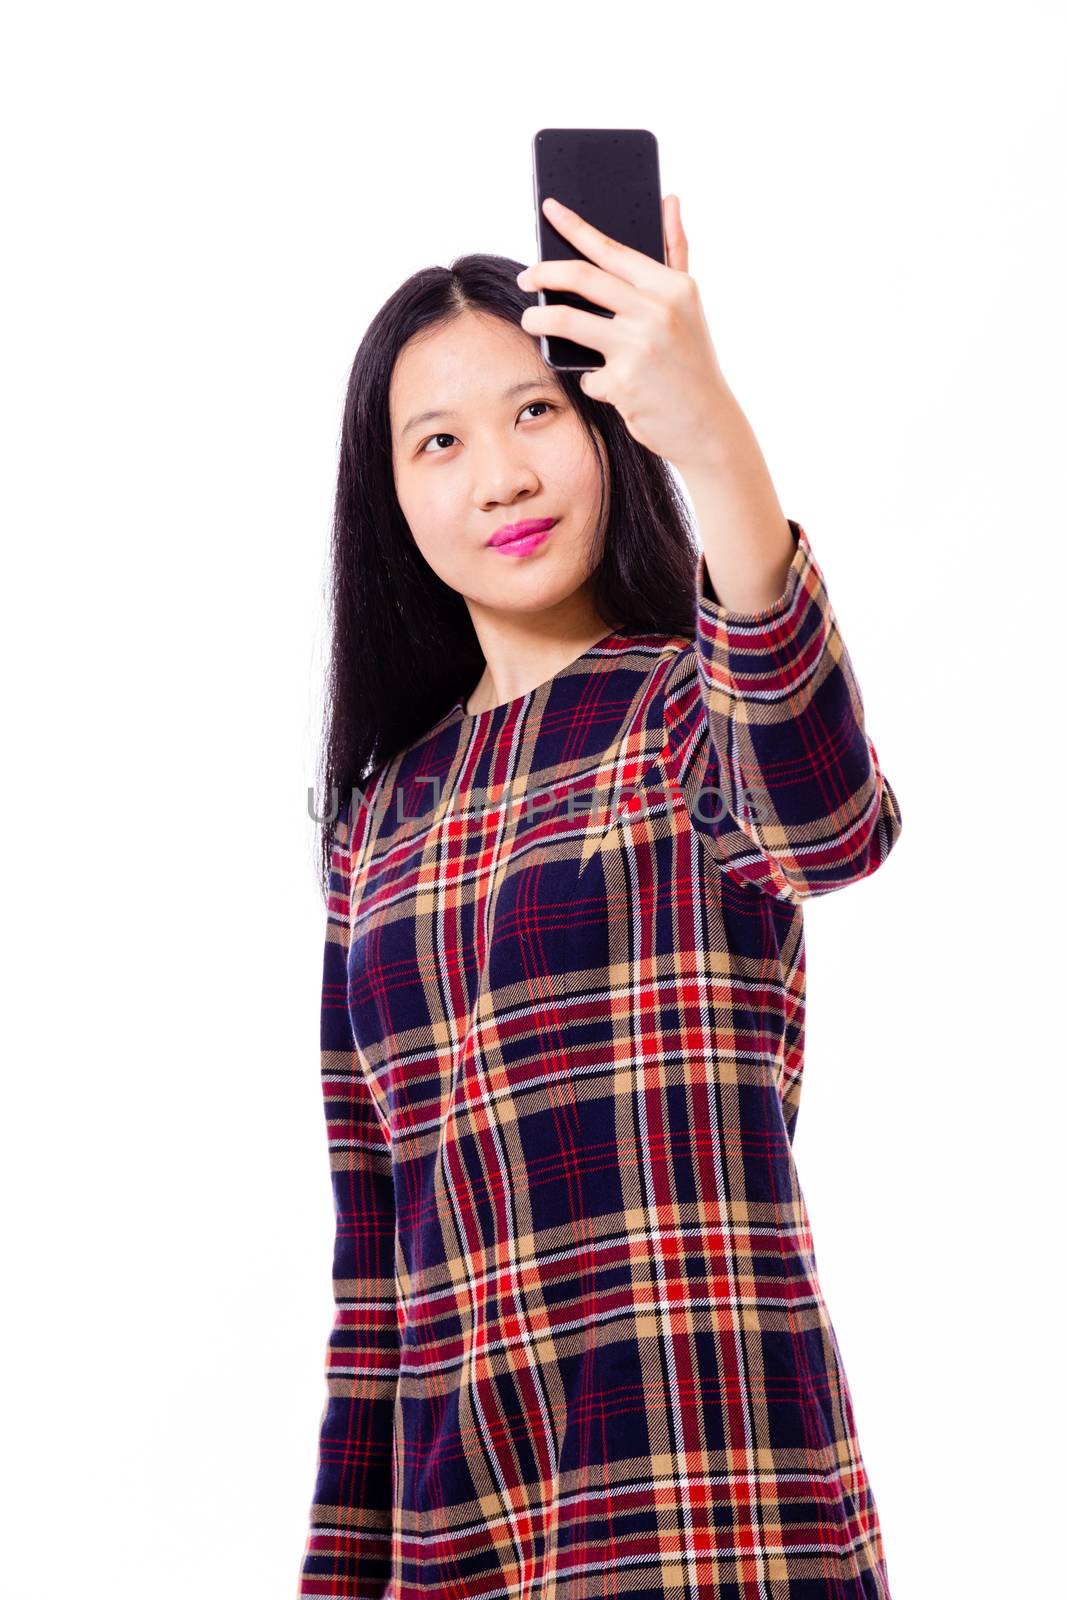 Chinese teenage girl in plaid dress taking selfie with smartphone